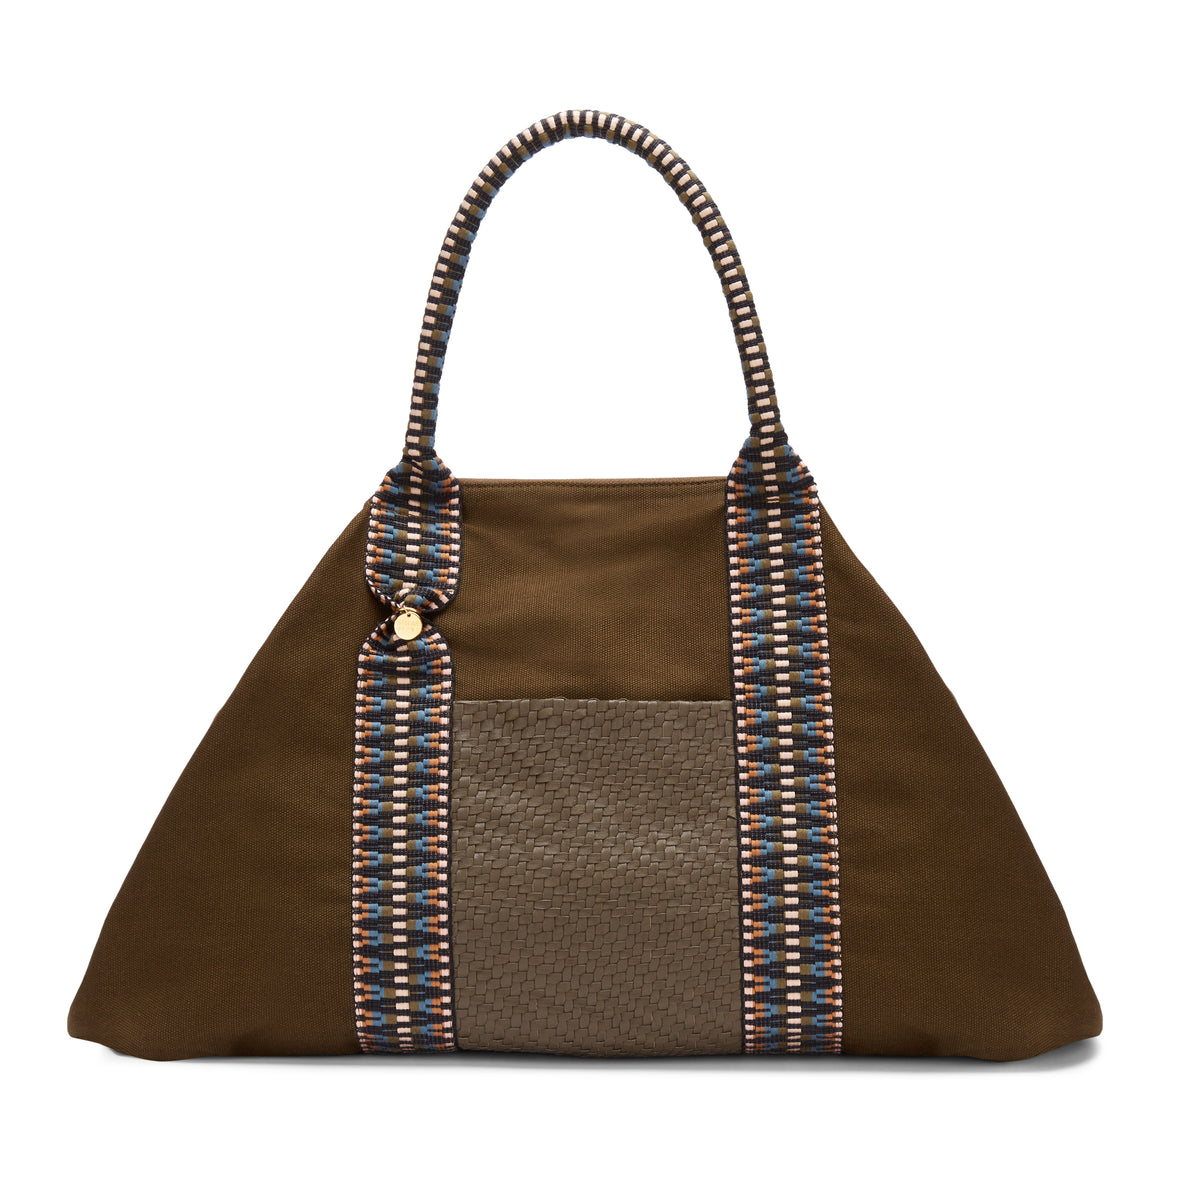 Sayan Canvas and Leather Weekender Bag in Dark Olive by STELAR